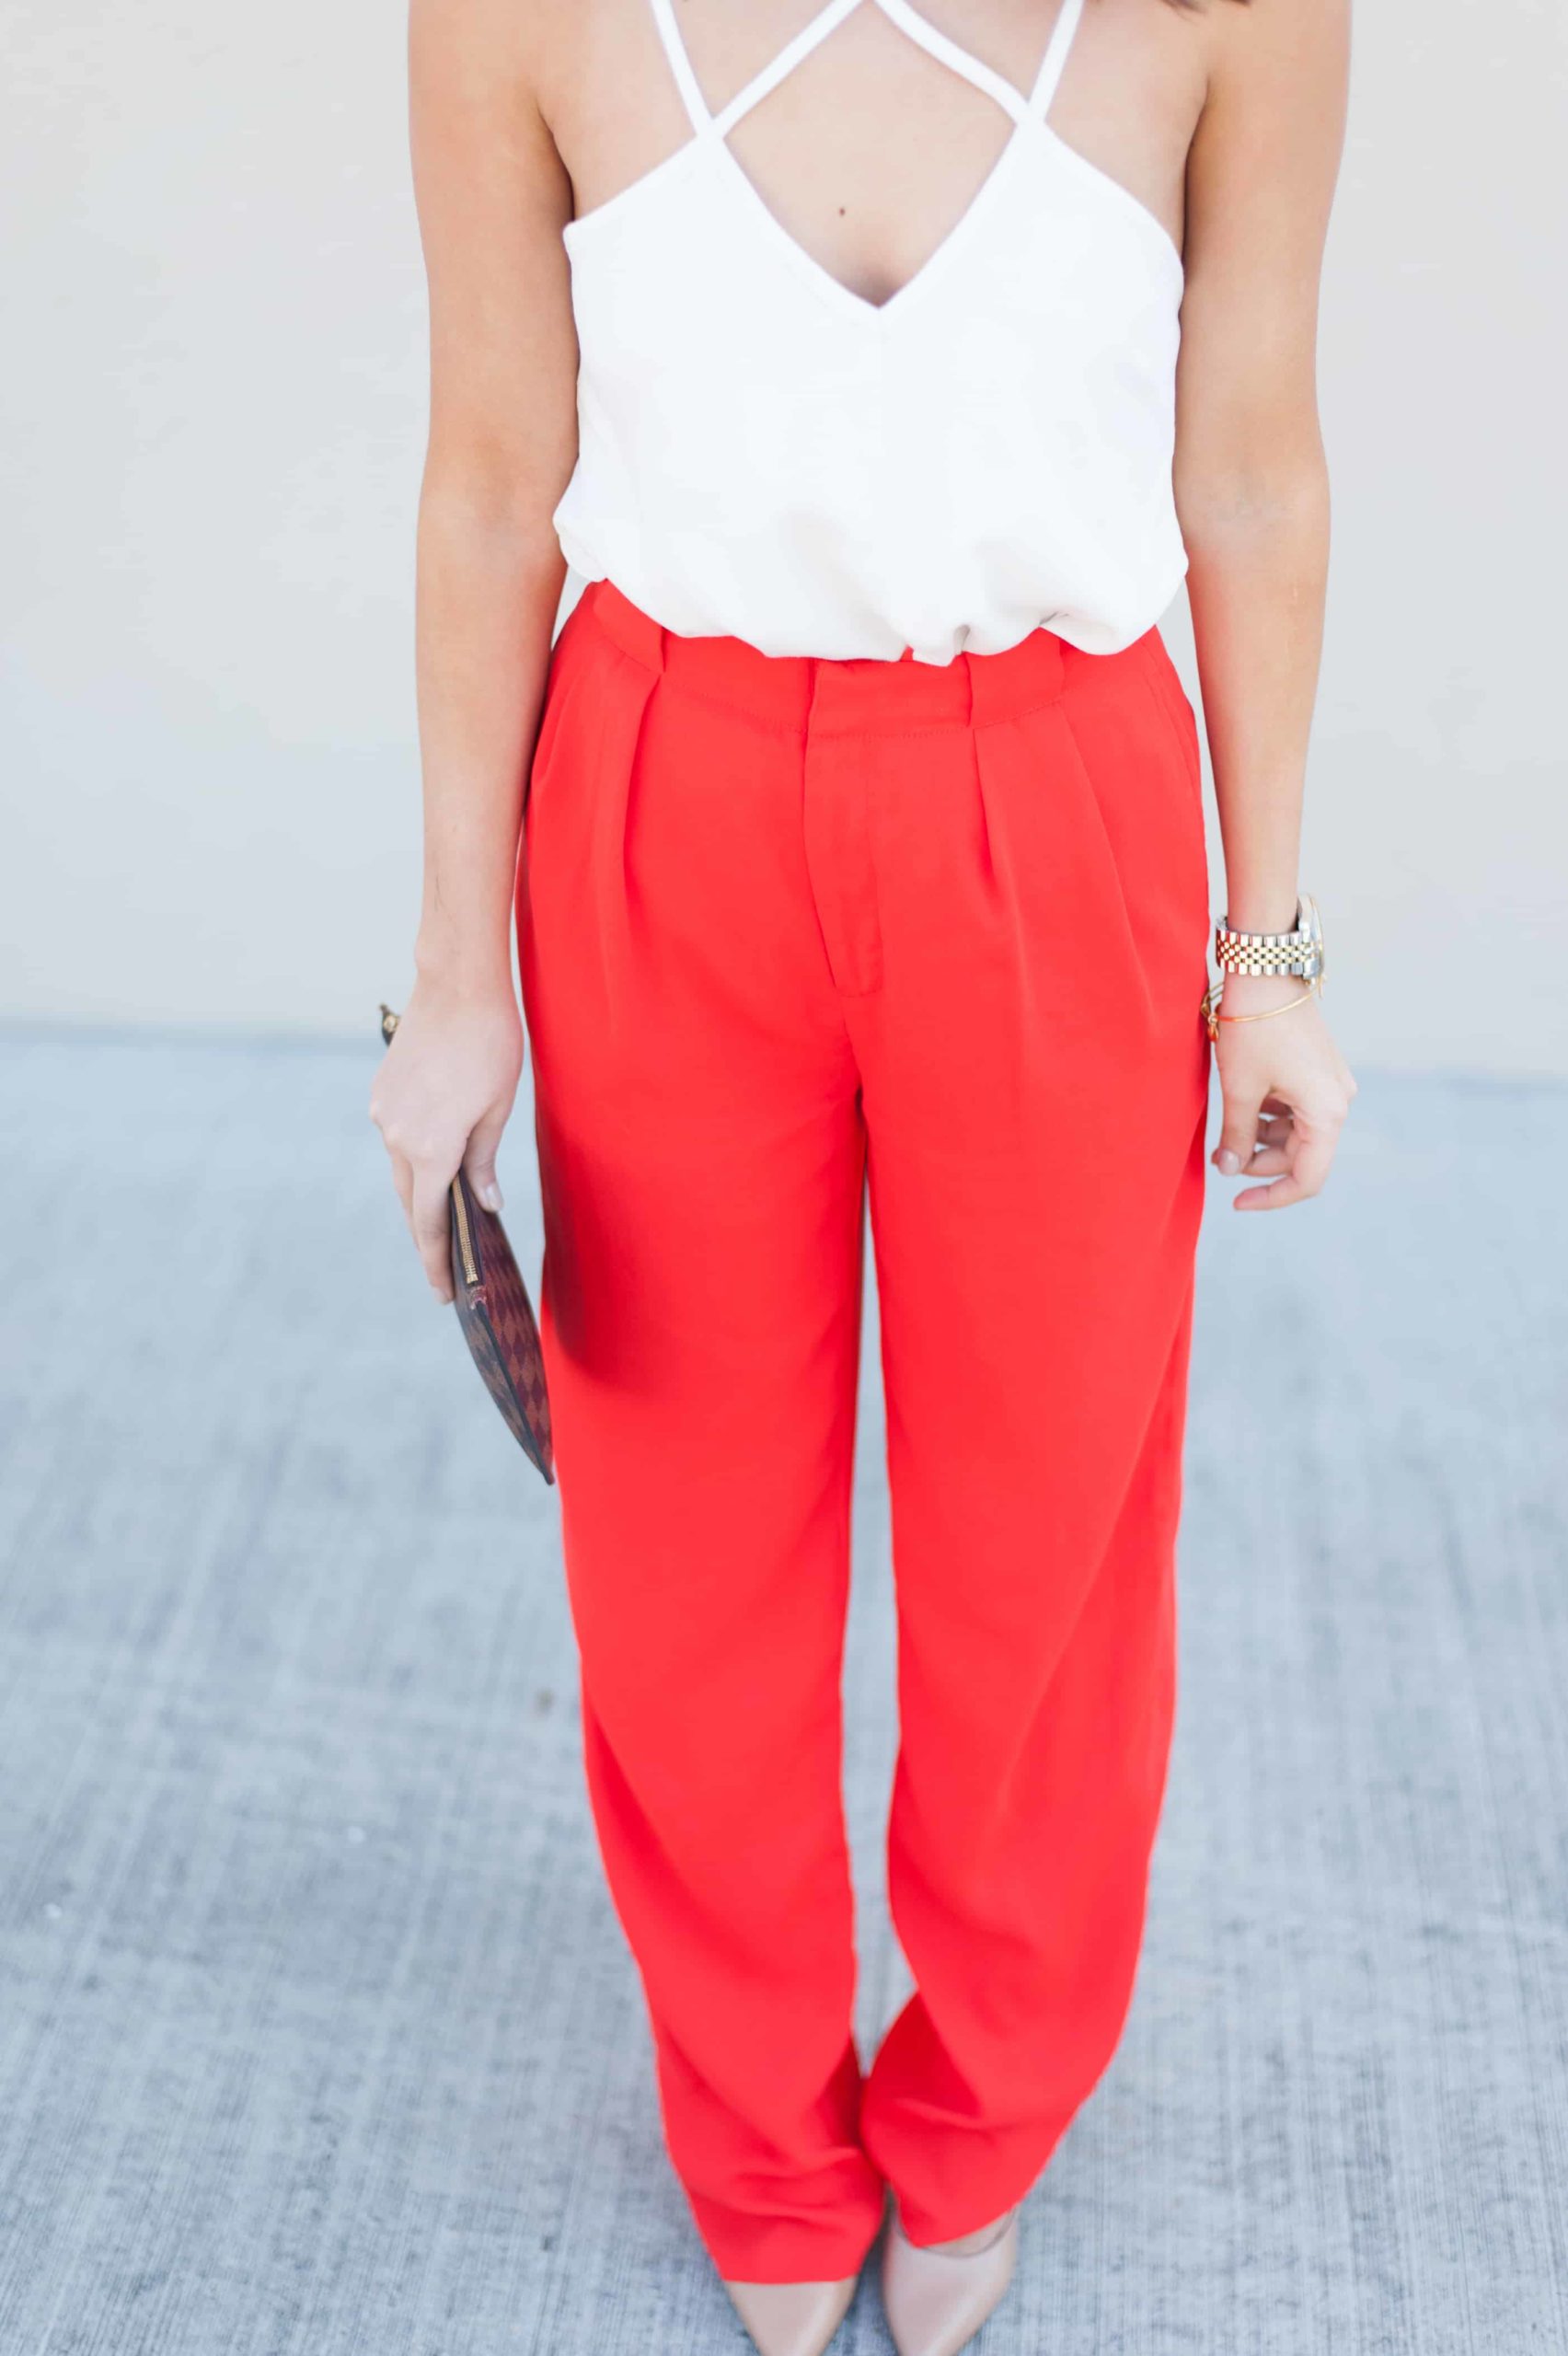 Dress Up Buttercup | Houston Fashion Blog - Dede Raad | Red Wide Leg